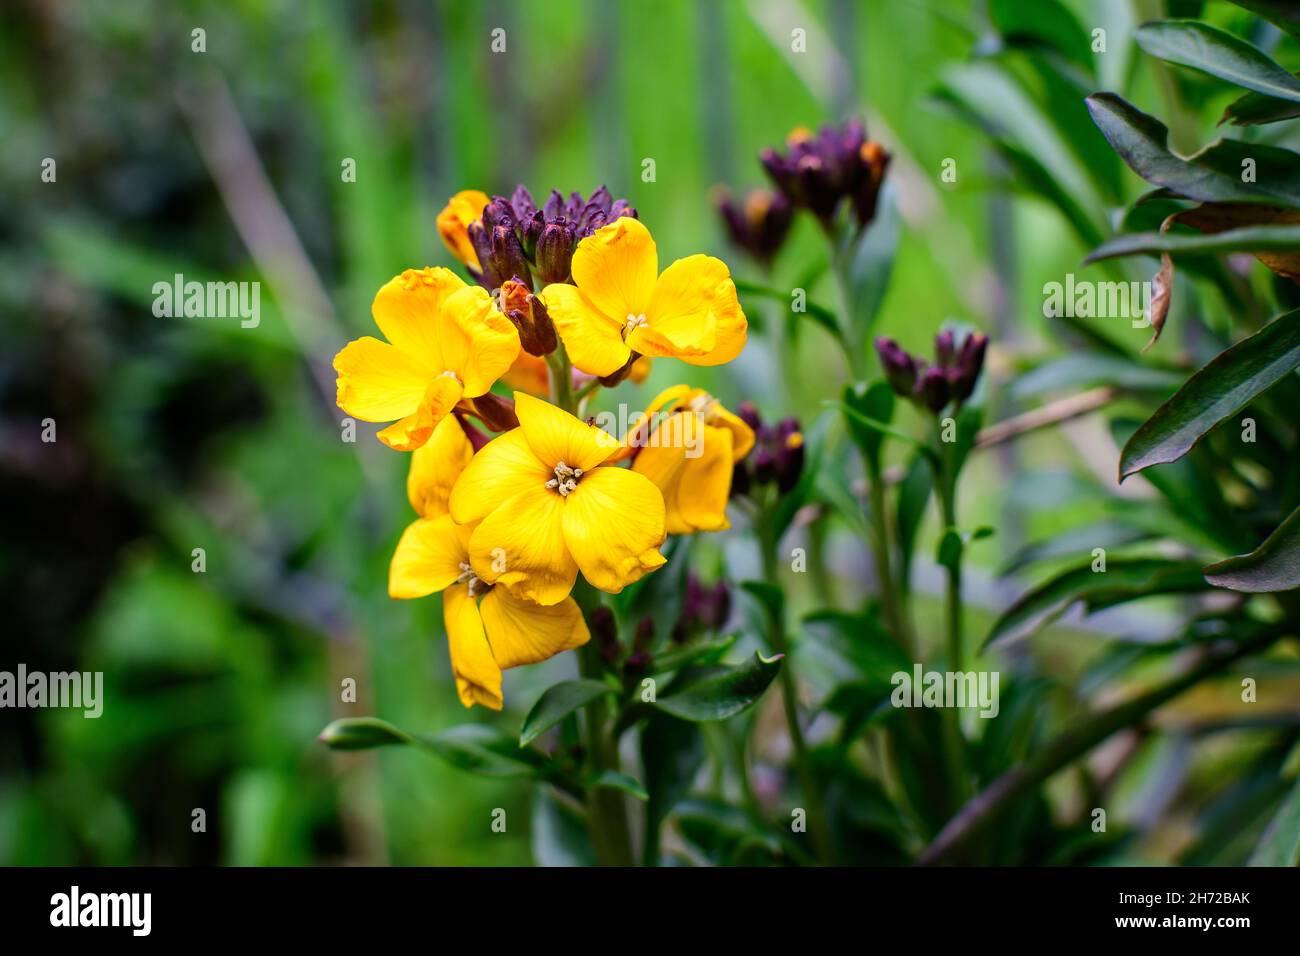 Small orange and red blooms and flowers of wallflower or Erysimum cheiri plant and green leaves in a garden in a sunny spring day, beautiful outdoor f Stock Photo